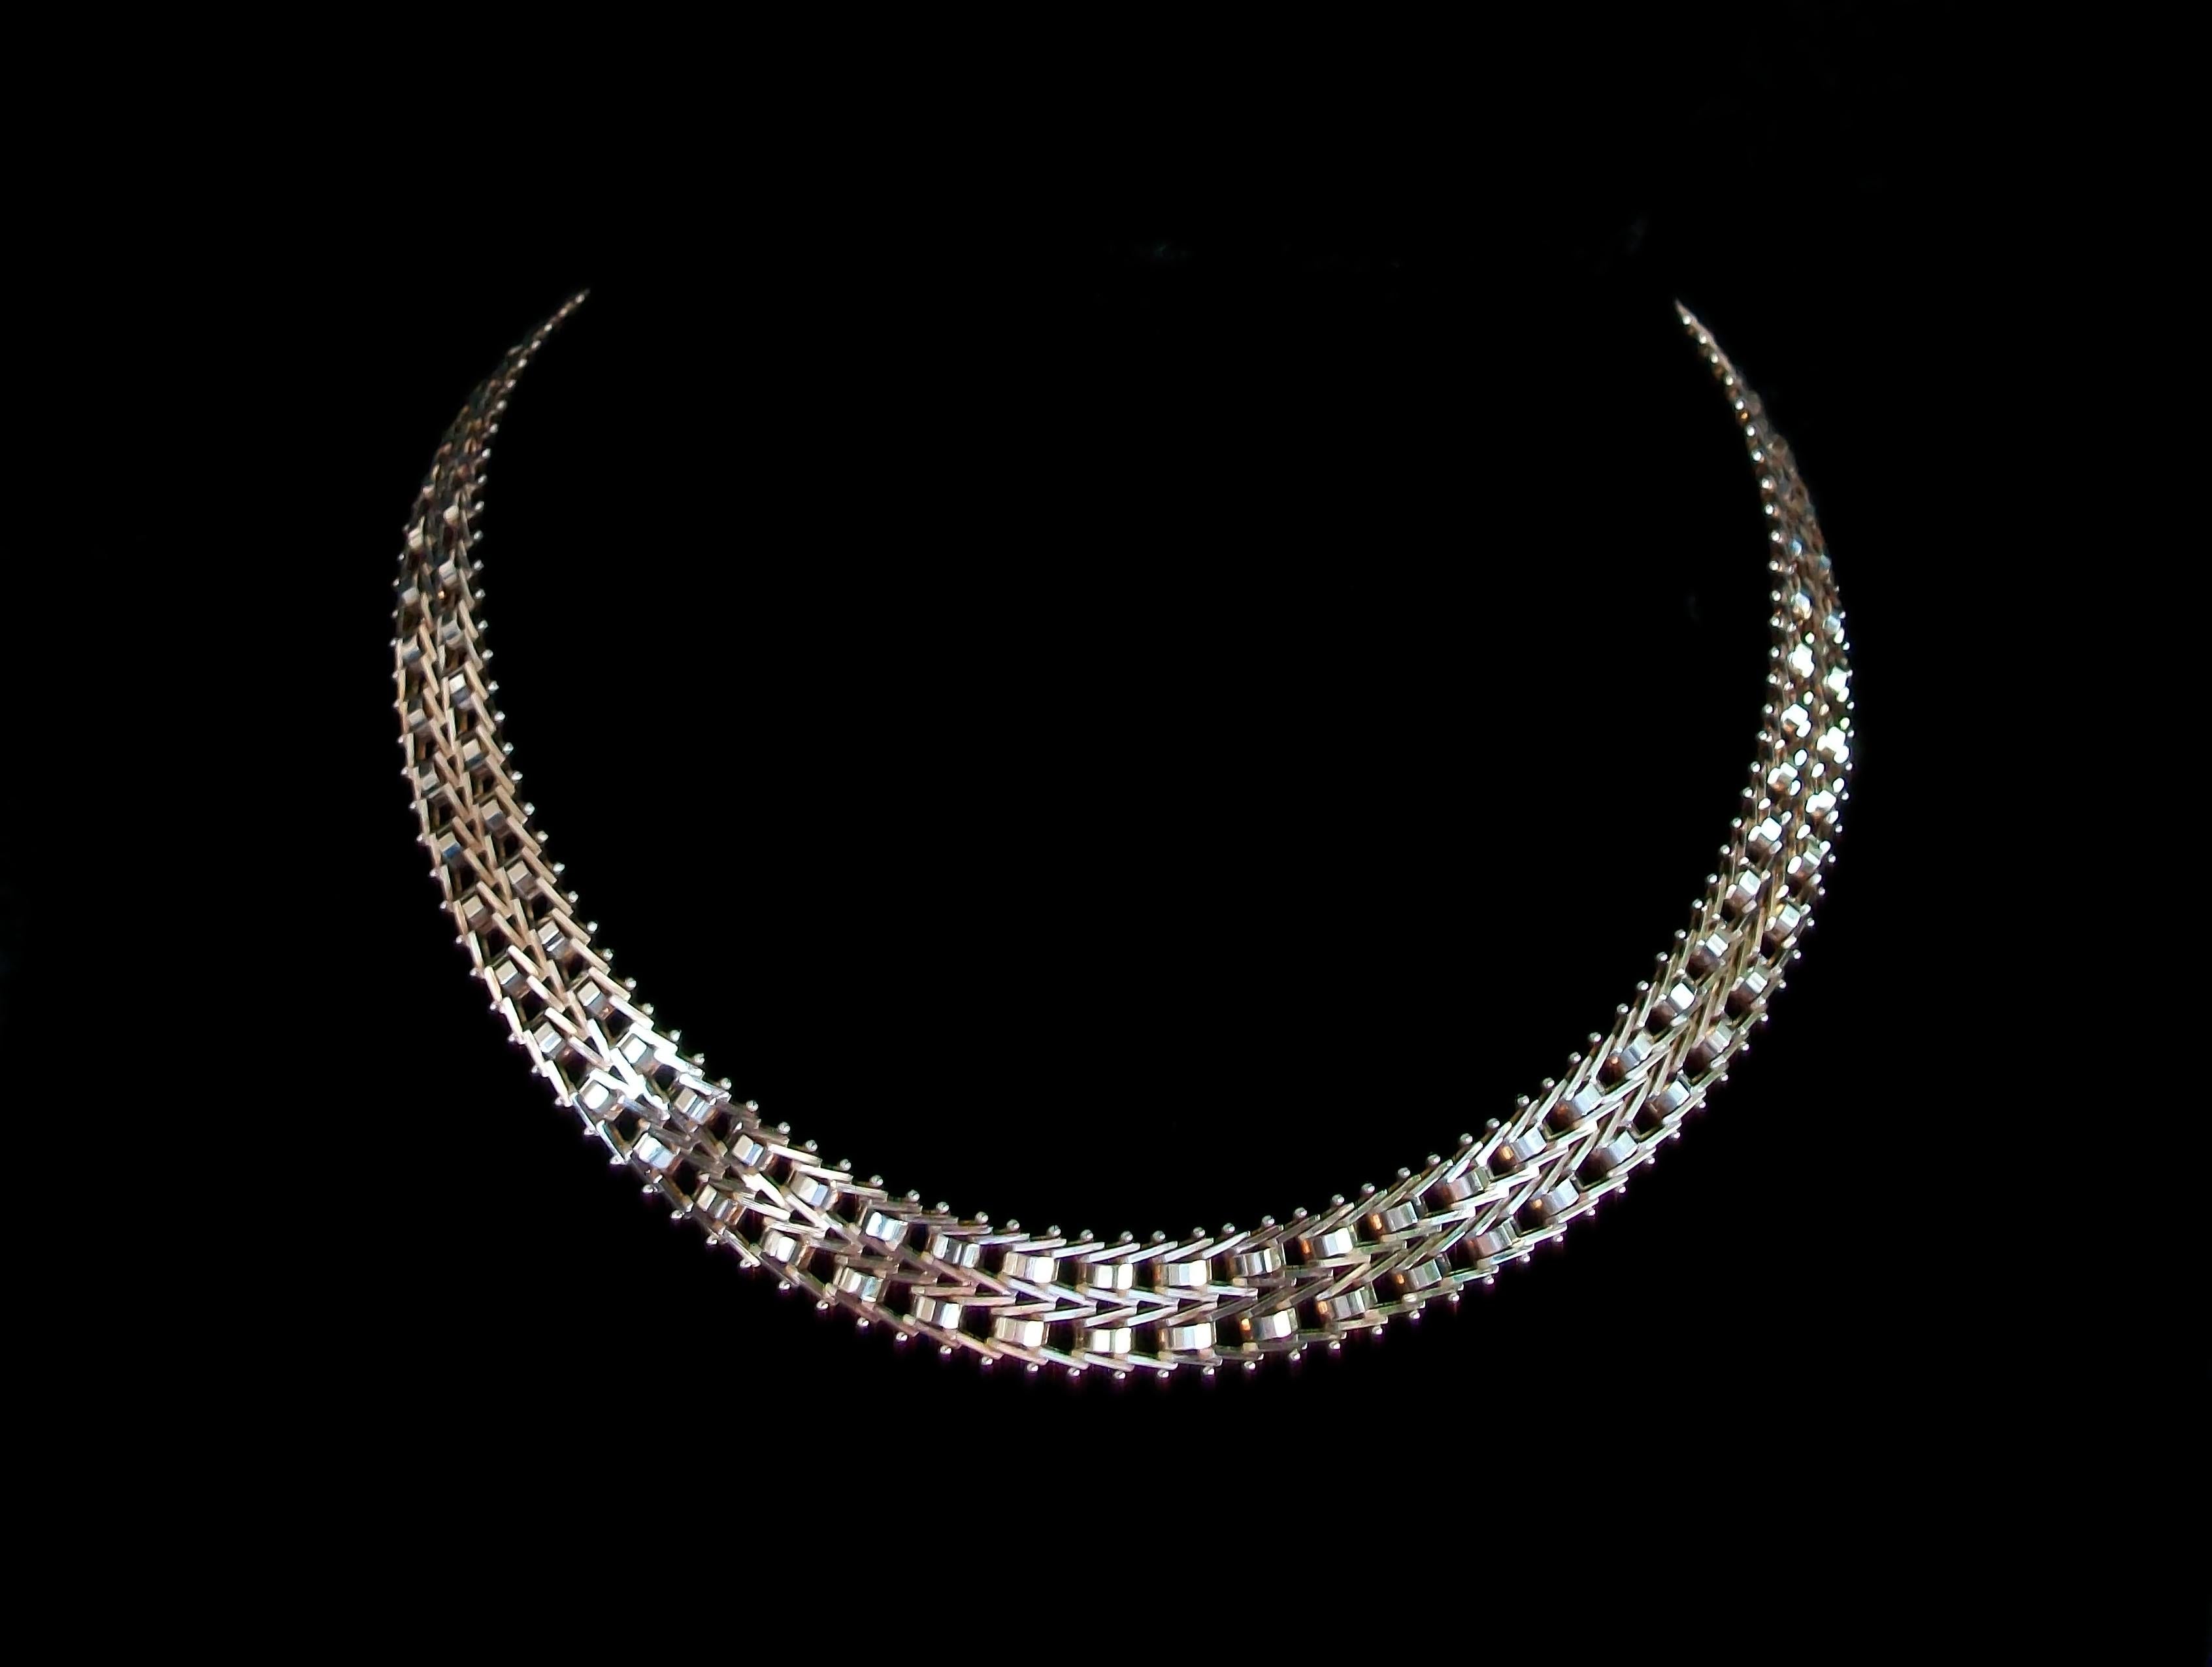 MILOR - Etruscan style sterling silver necklace - flat links in a stylized herringbone pattern with balls along each edge - 17